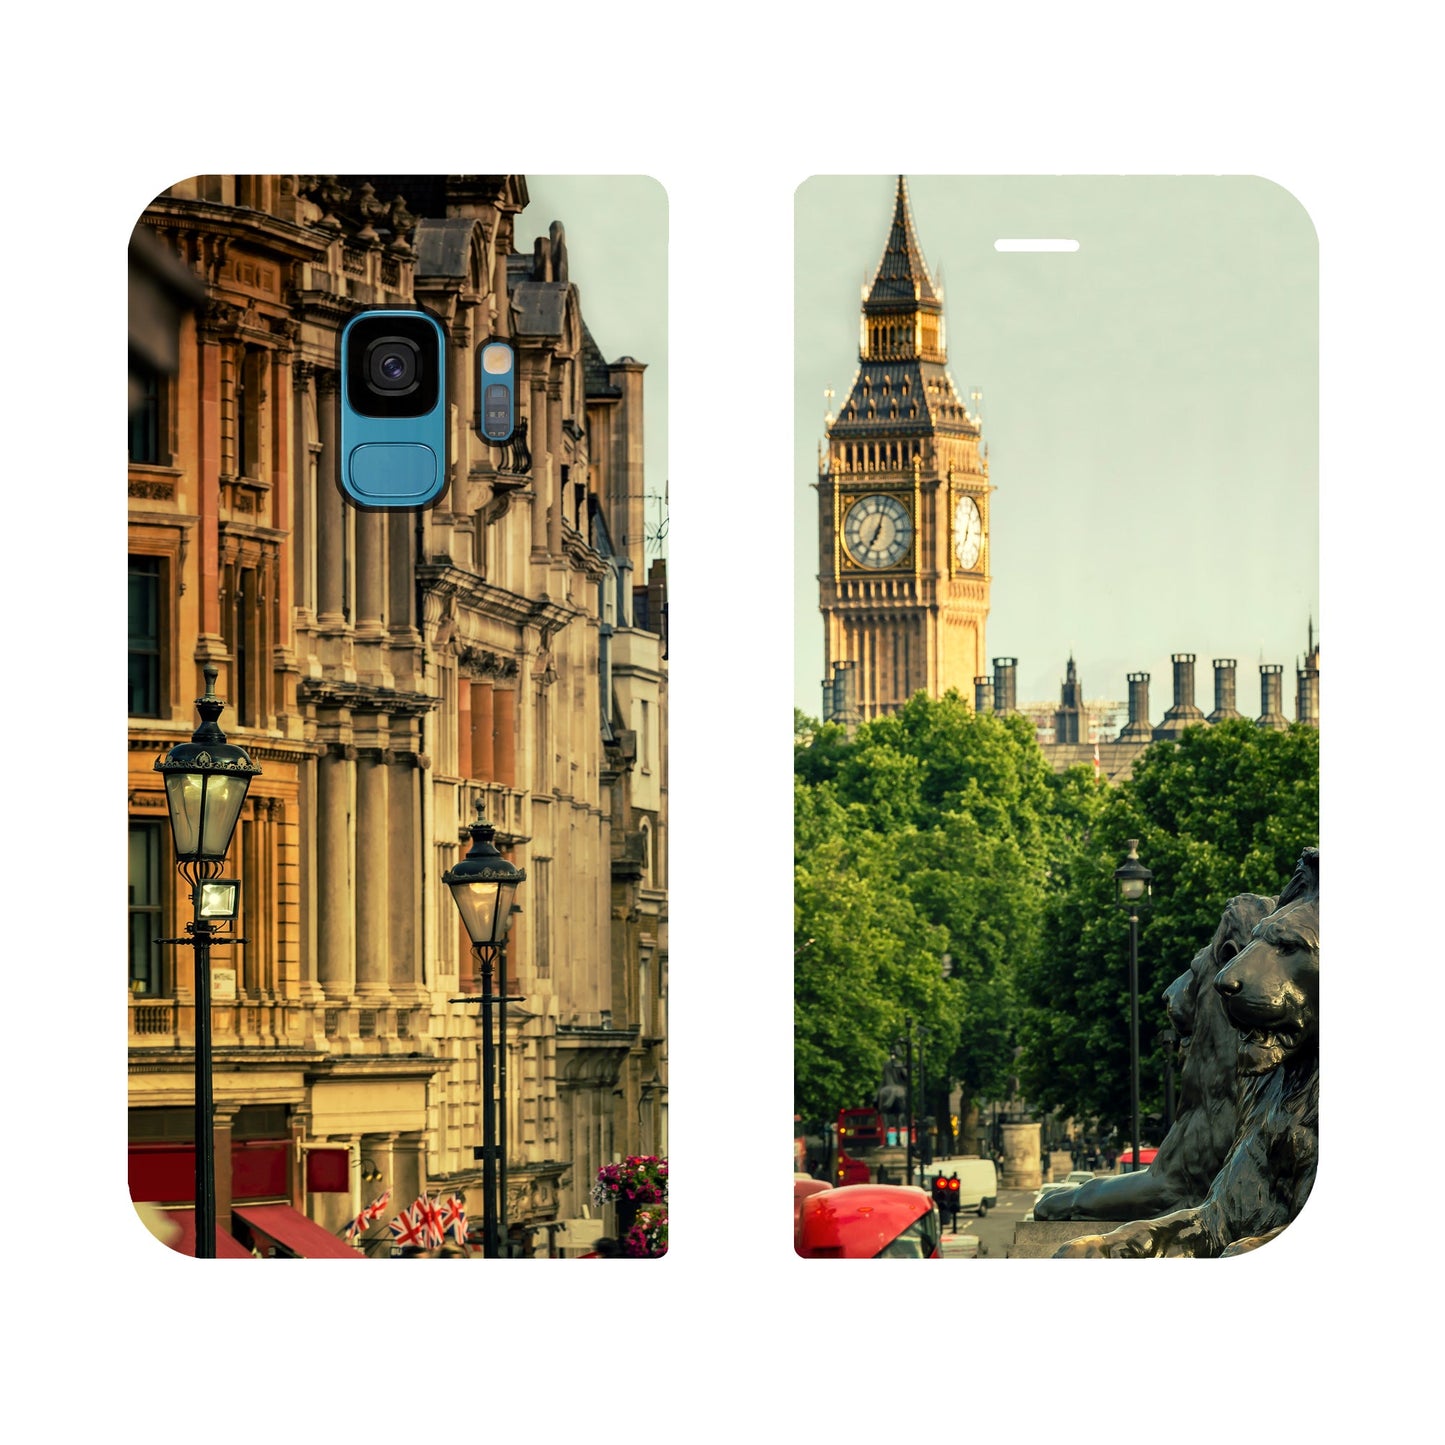 London City Panorama Case for iPhone and Samsung